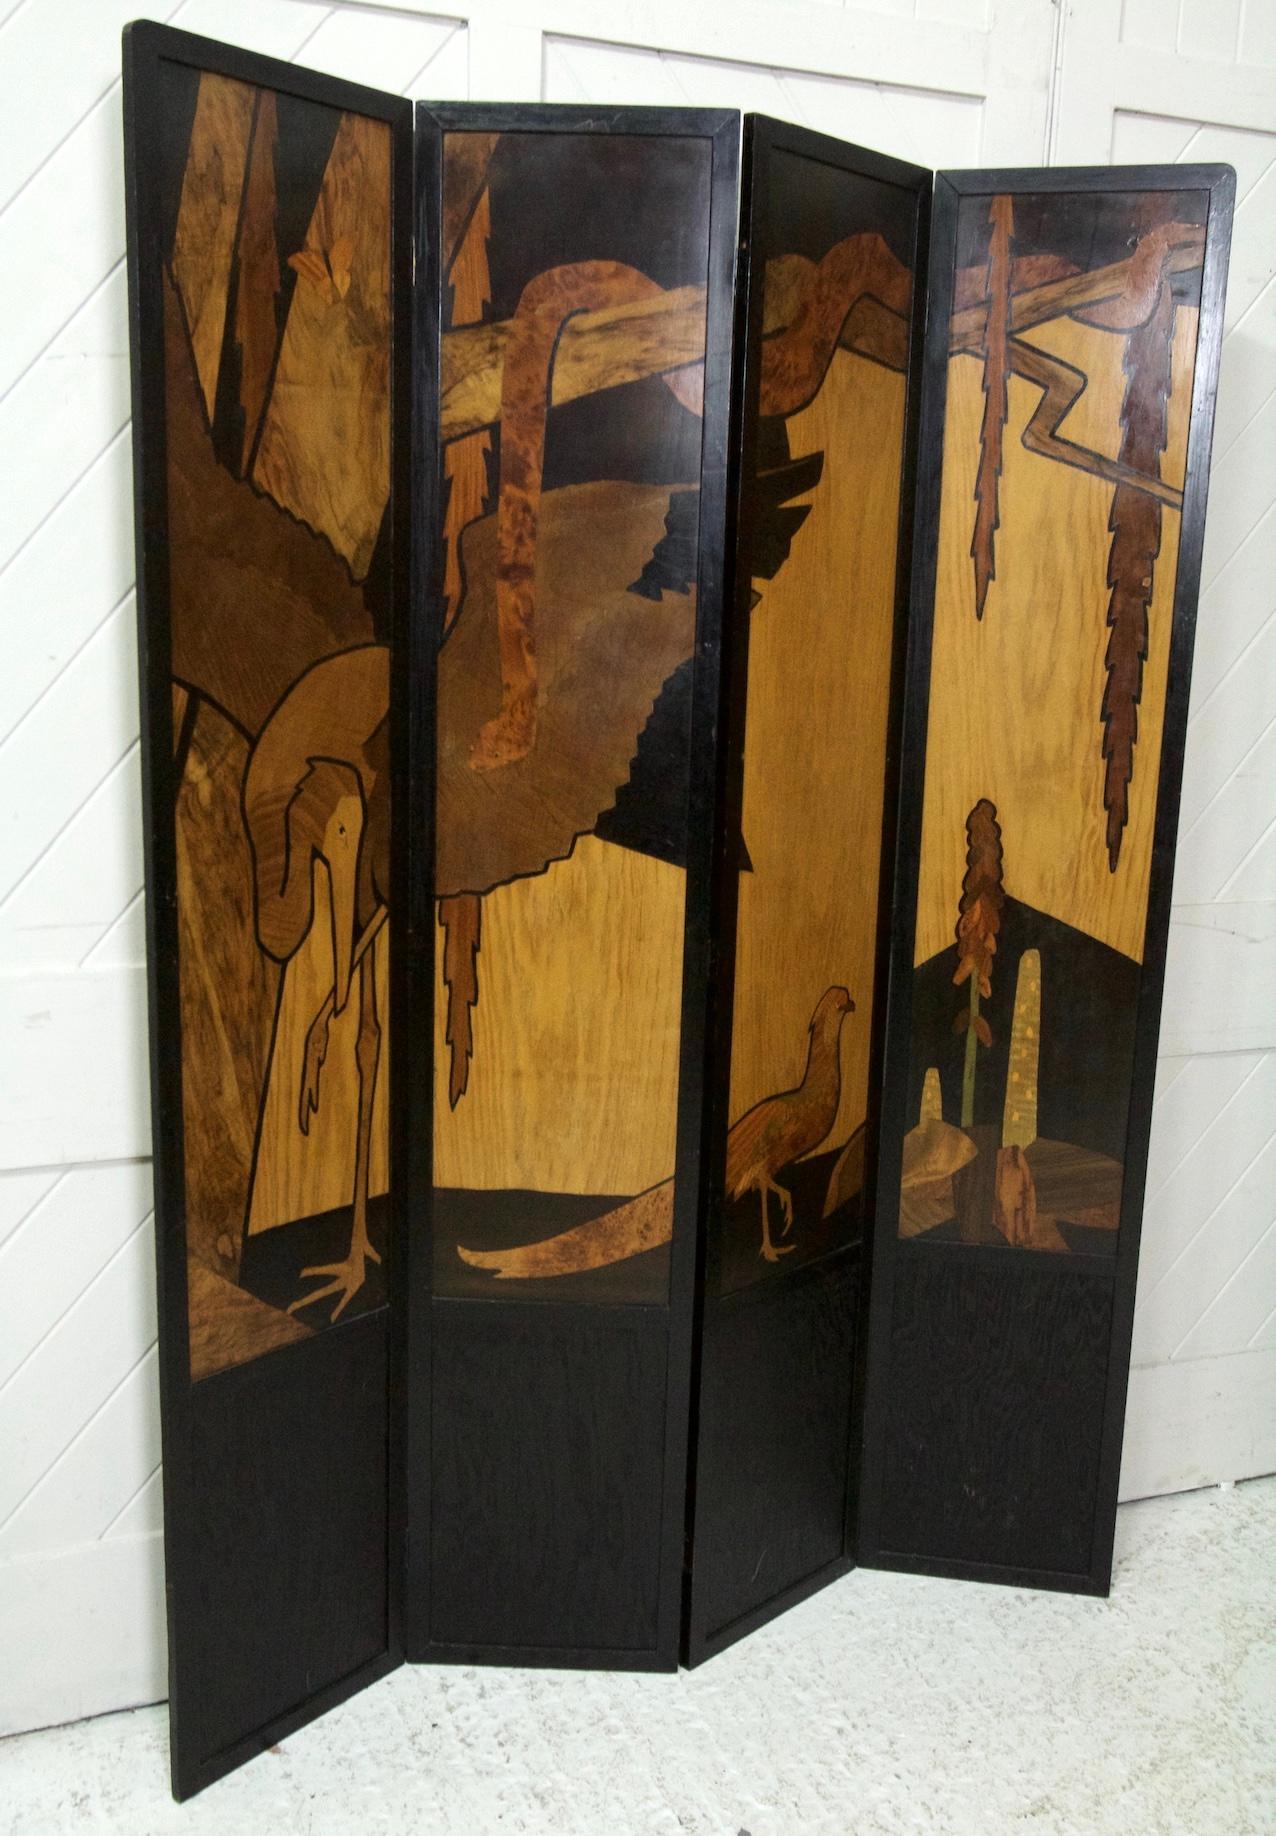 An Extremely rare four fold wood inlay screen
'THE JUNGLE'
Designed by W A Chase 
For THE ROWLEY GALLERY
Exhibited in 1924
Measures: height 190 cm full width 140cm (each panel 35cm wide)

This screen is a wonderful example of the